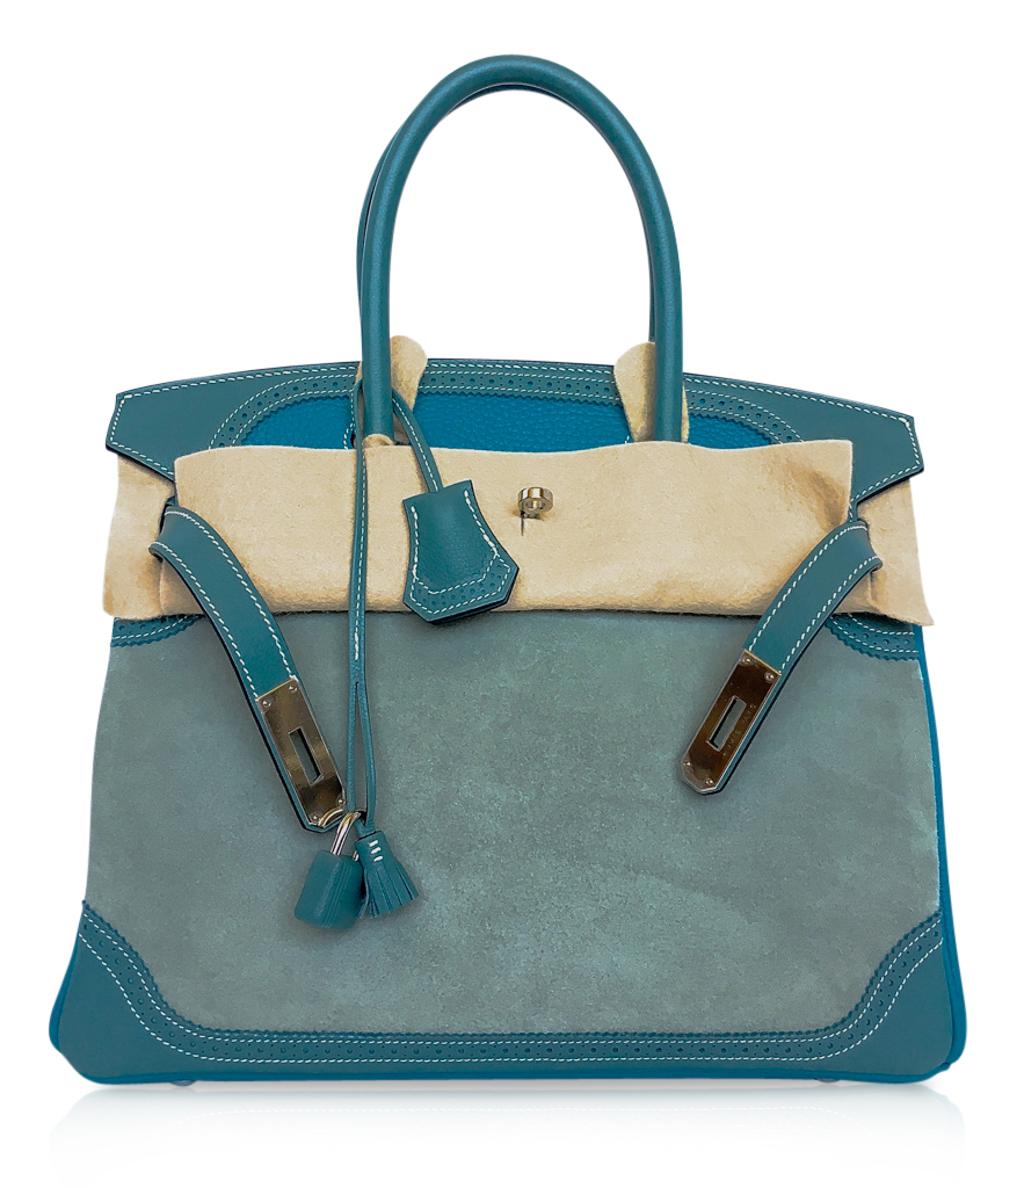 Hermes Birkin 30 Bag Grizzly Doblis Ghillies Ciel Turquoise Limited Edition New 2